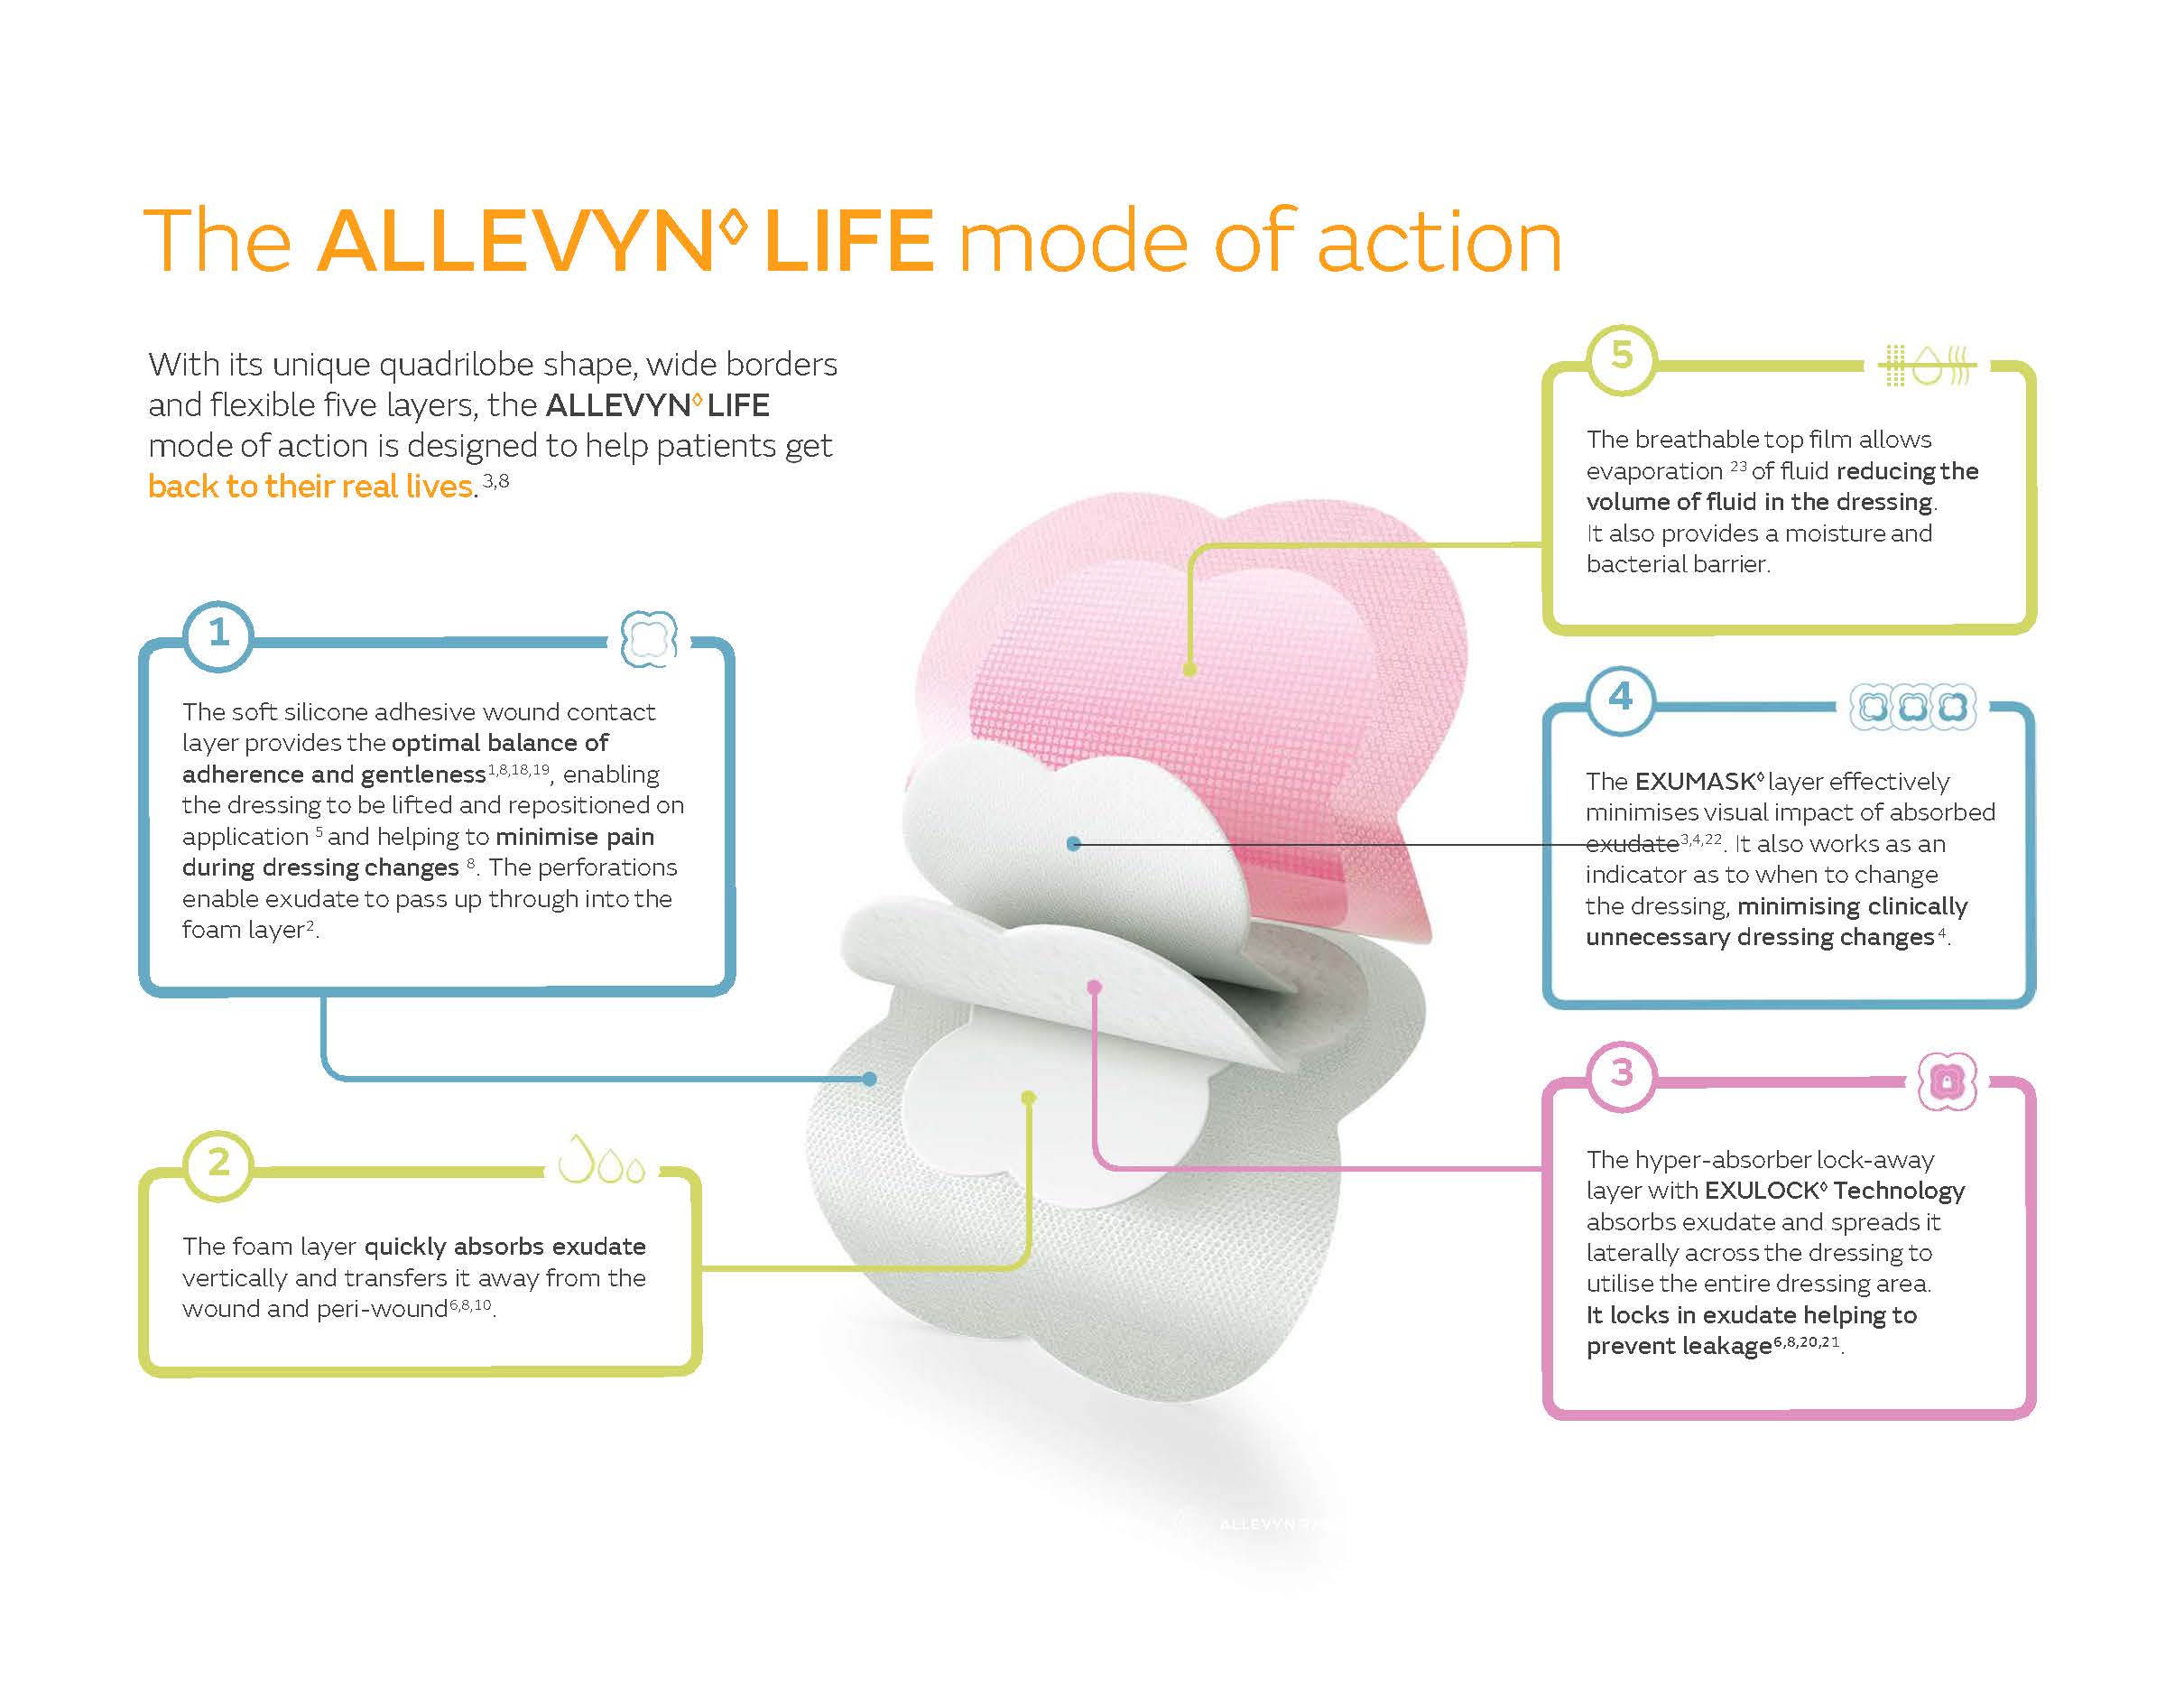 The ALLEVYN Life Mode of Action